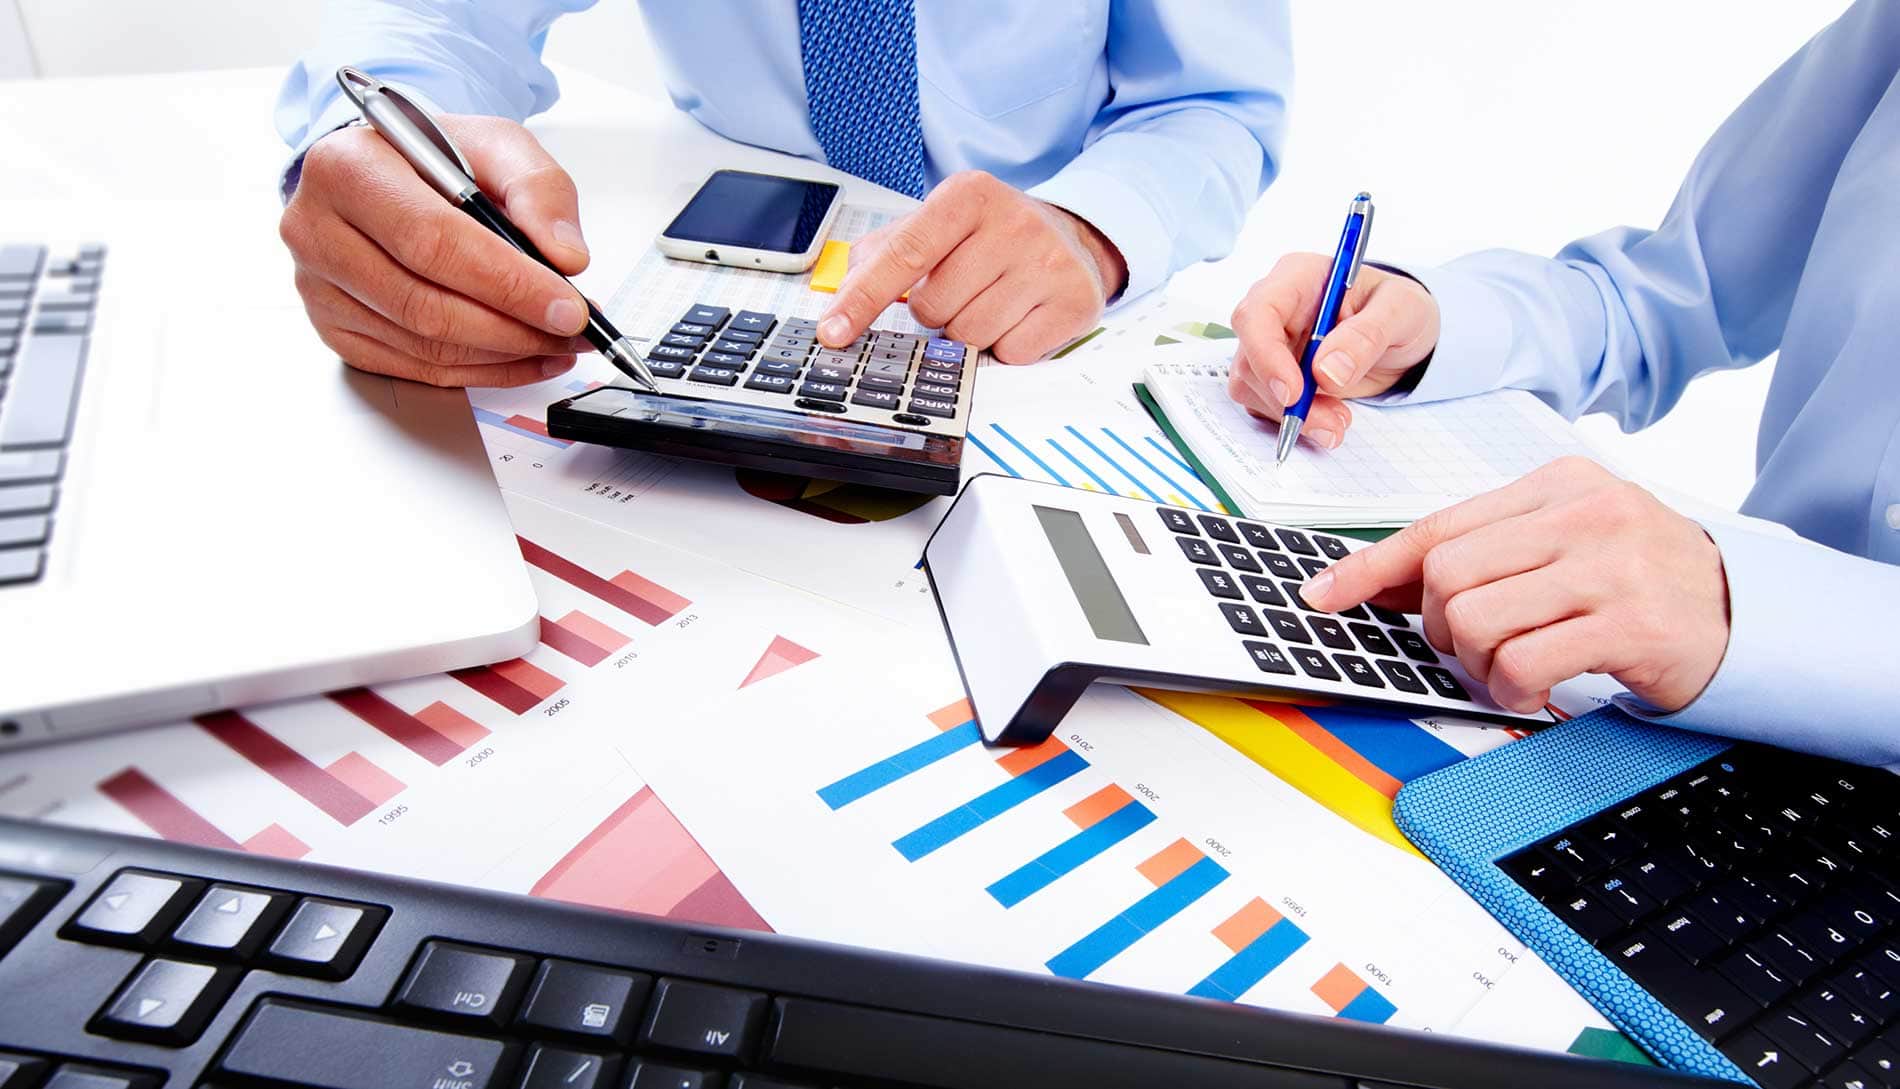 Bright Outsource Bookkeeping - Punjab, , outsourcing